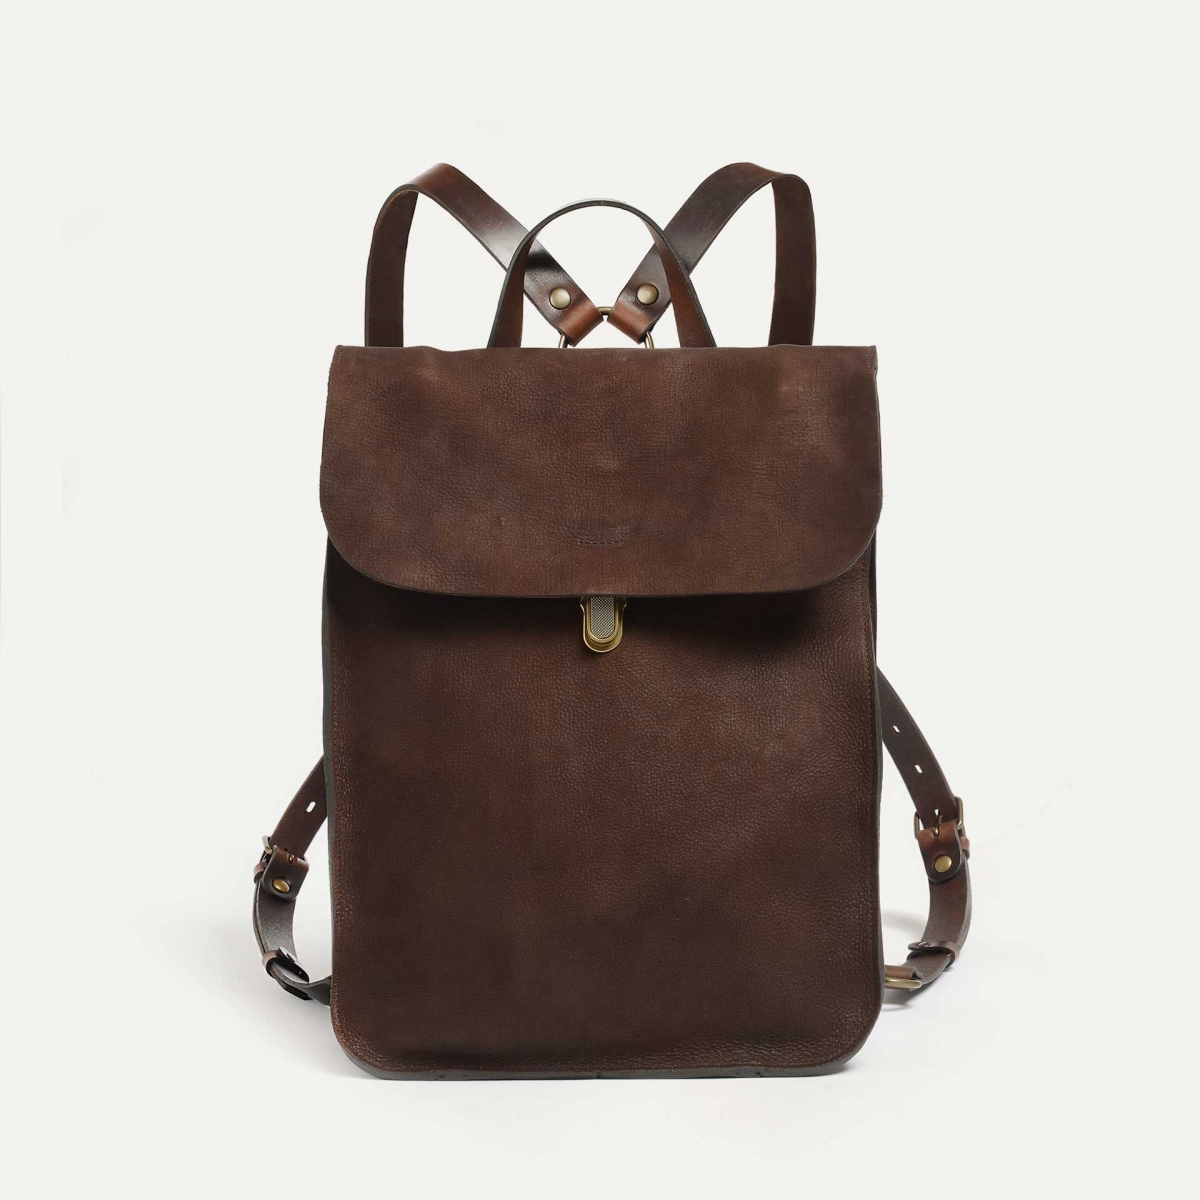 Puncho leather backpack WAX - Coffee / Waxed Leather (image n°1)